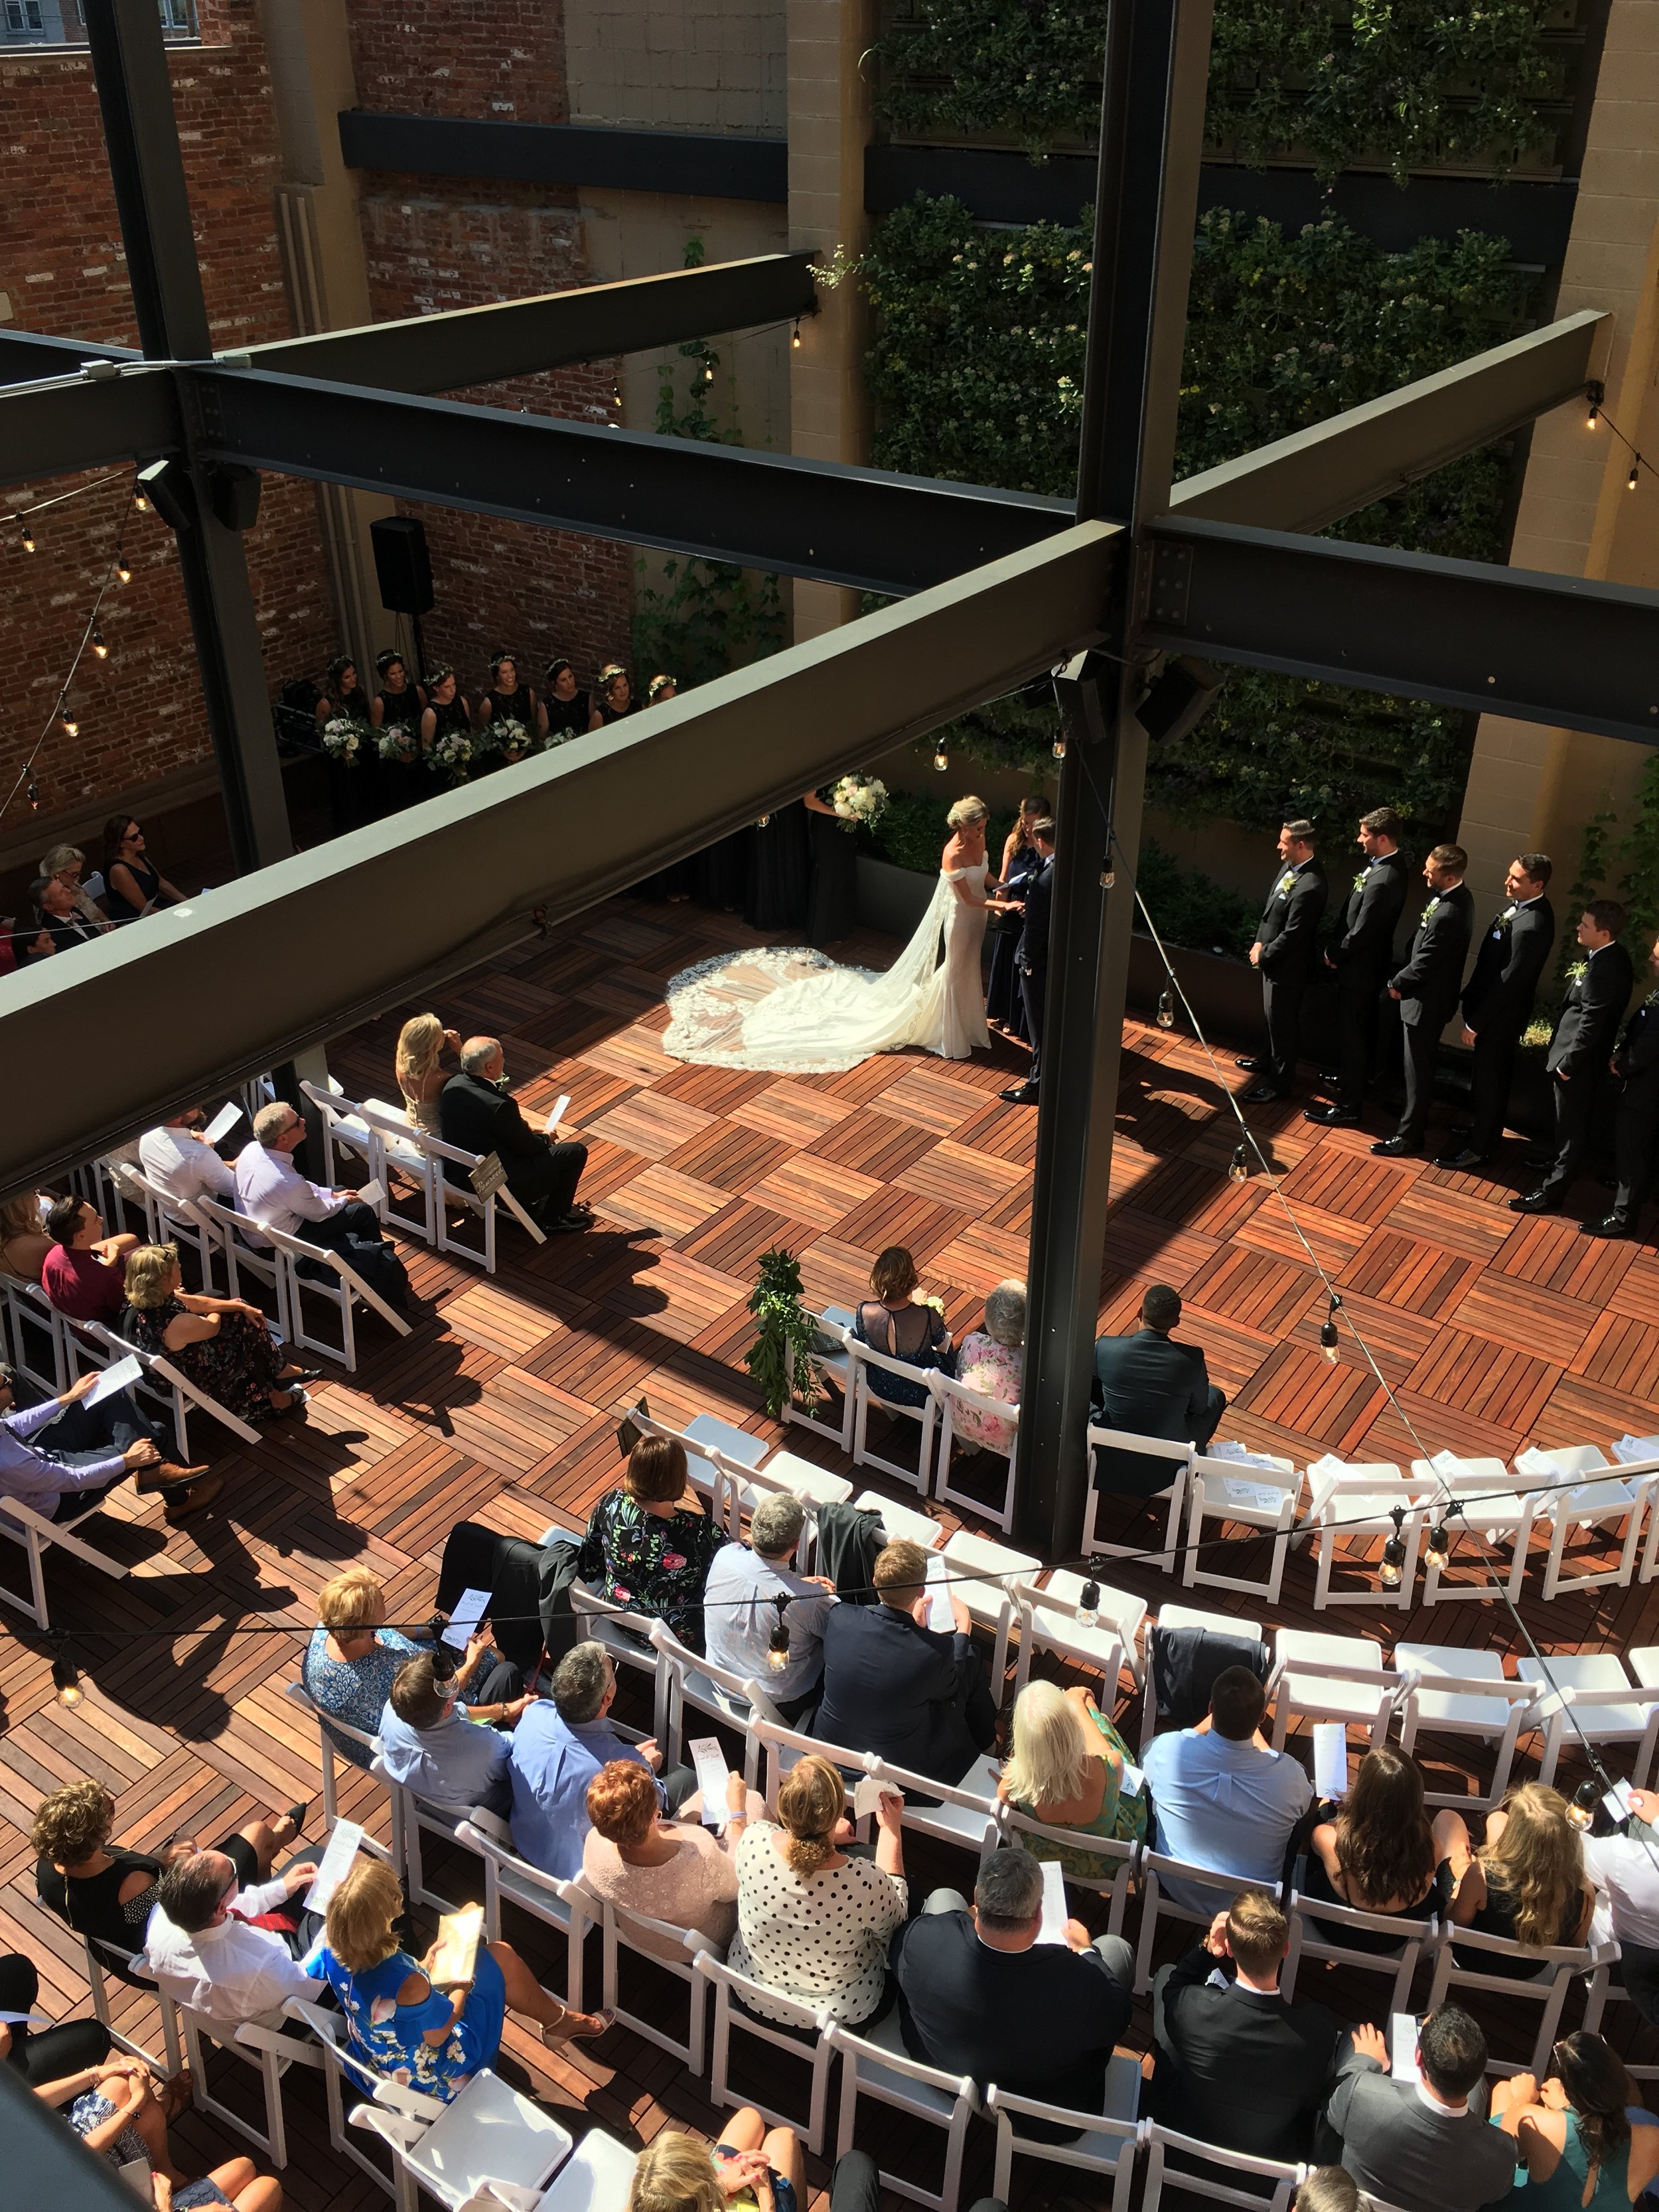 Ceremony space on outdoor Terrace from above